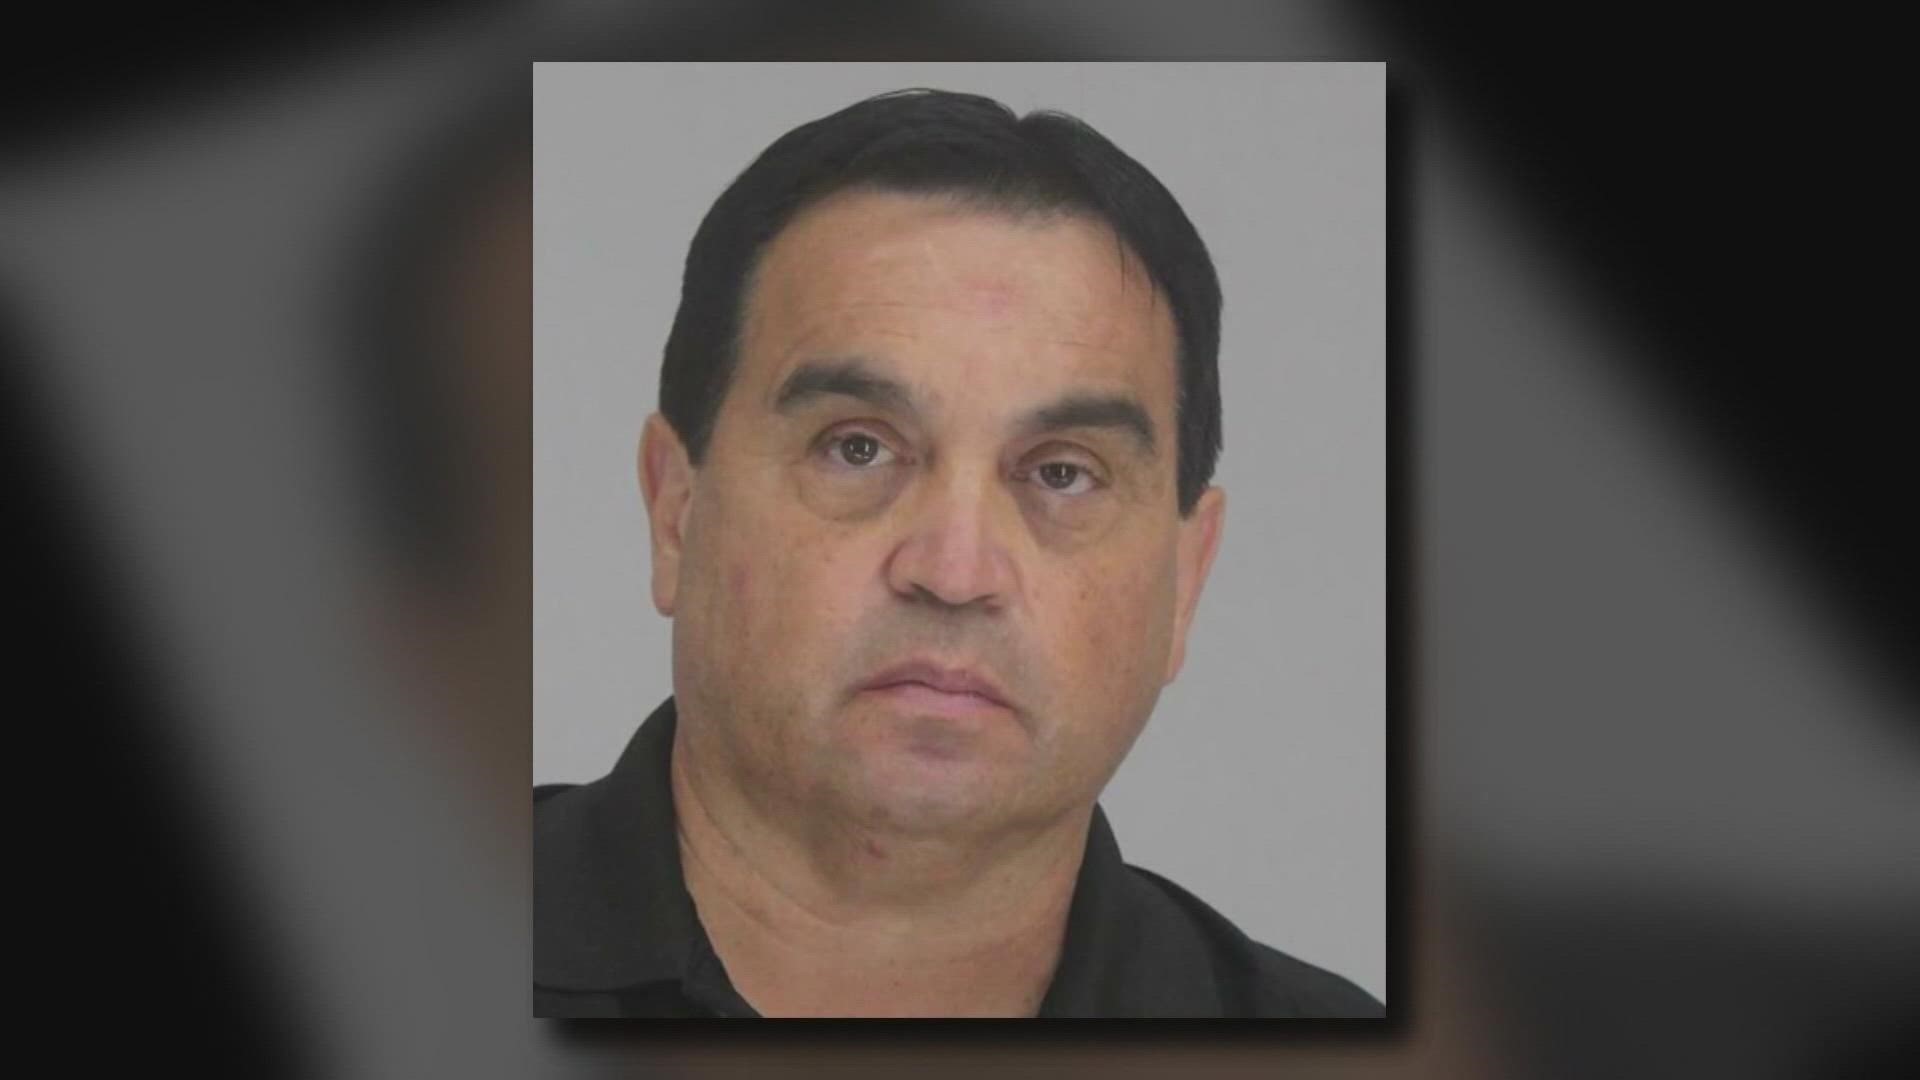 A Dallas doctor accused of tampering with IV bags will remain in custody.